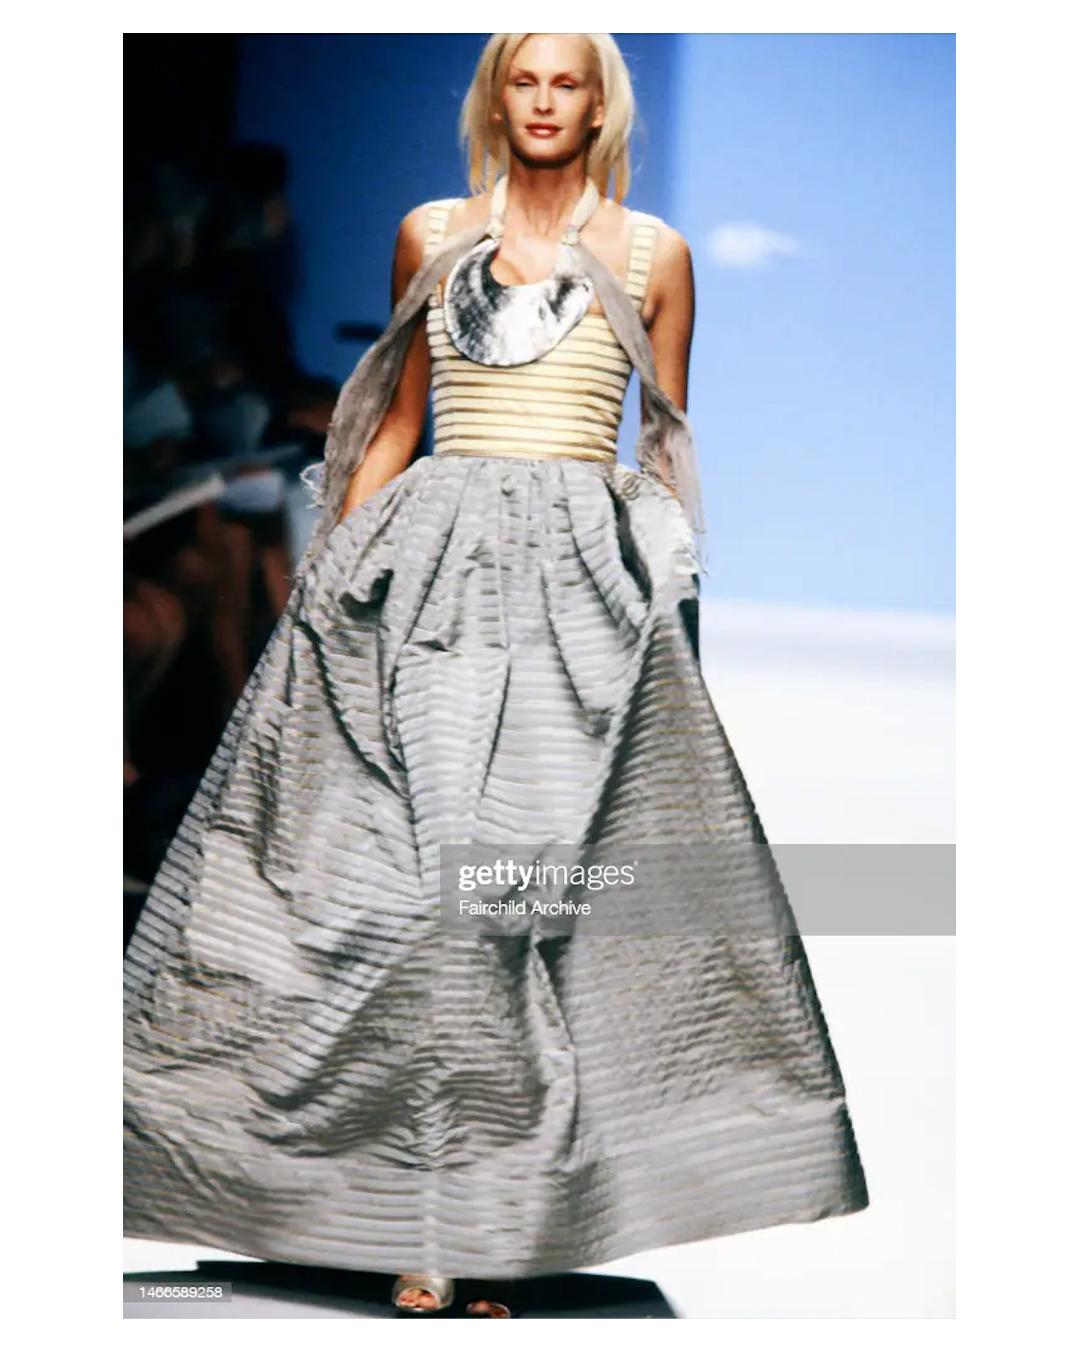 An incredible gown by Oscar de La Renta from the Spring Summer 2000 collection
Pale yellow corset style upper with a grey structured skirt that flares out beautifully 
Stripe pattern
Detachable belt that ties at the back into a large oversized